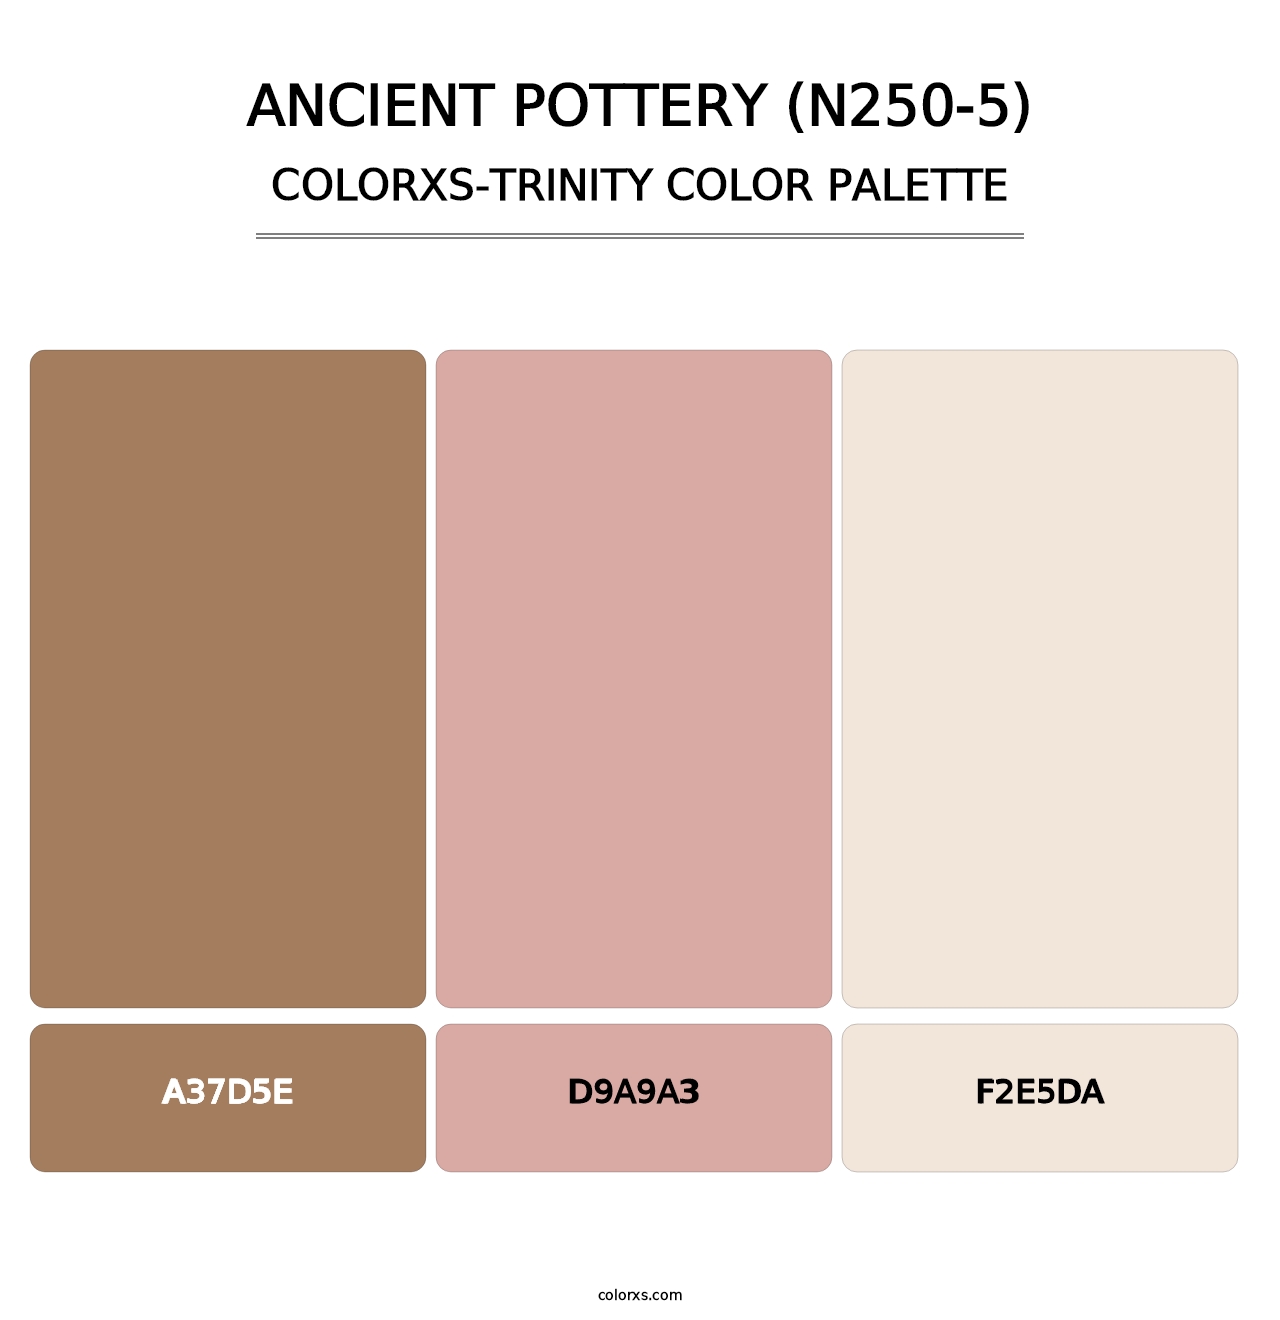 Ancient Pottery (N250-5) - Colorxs Trinity Palette